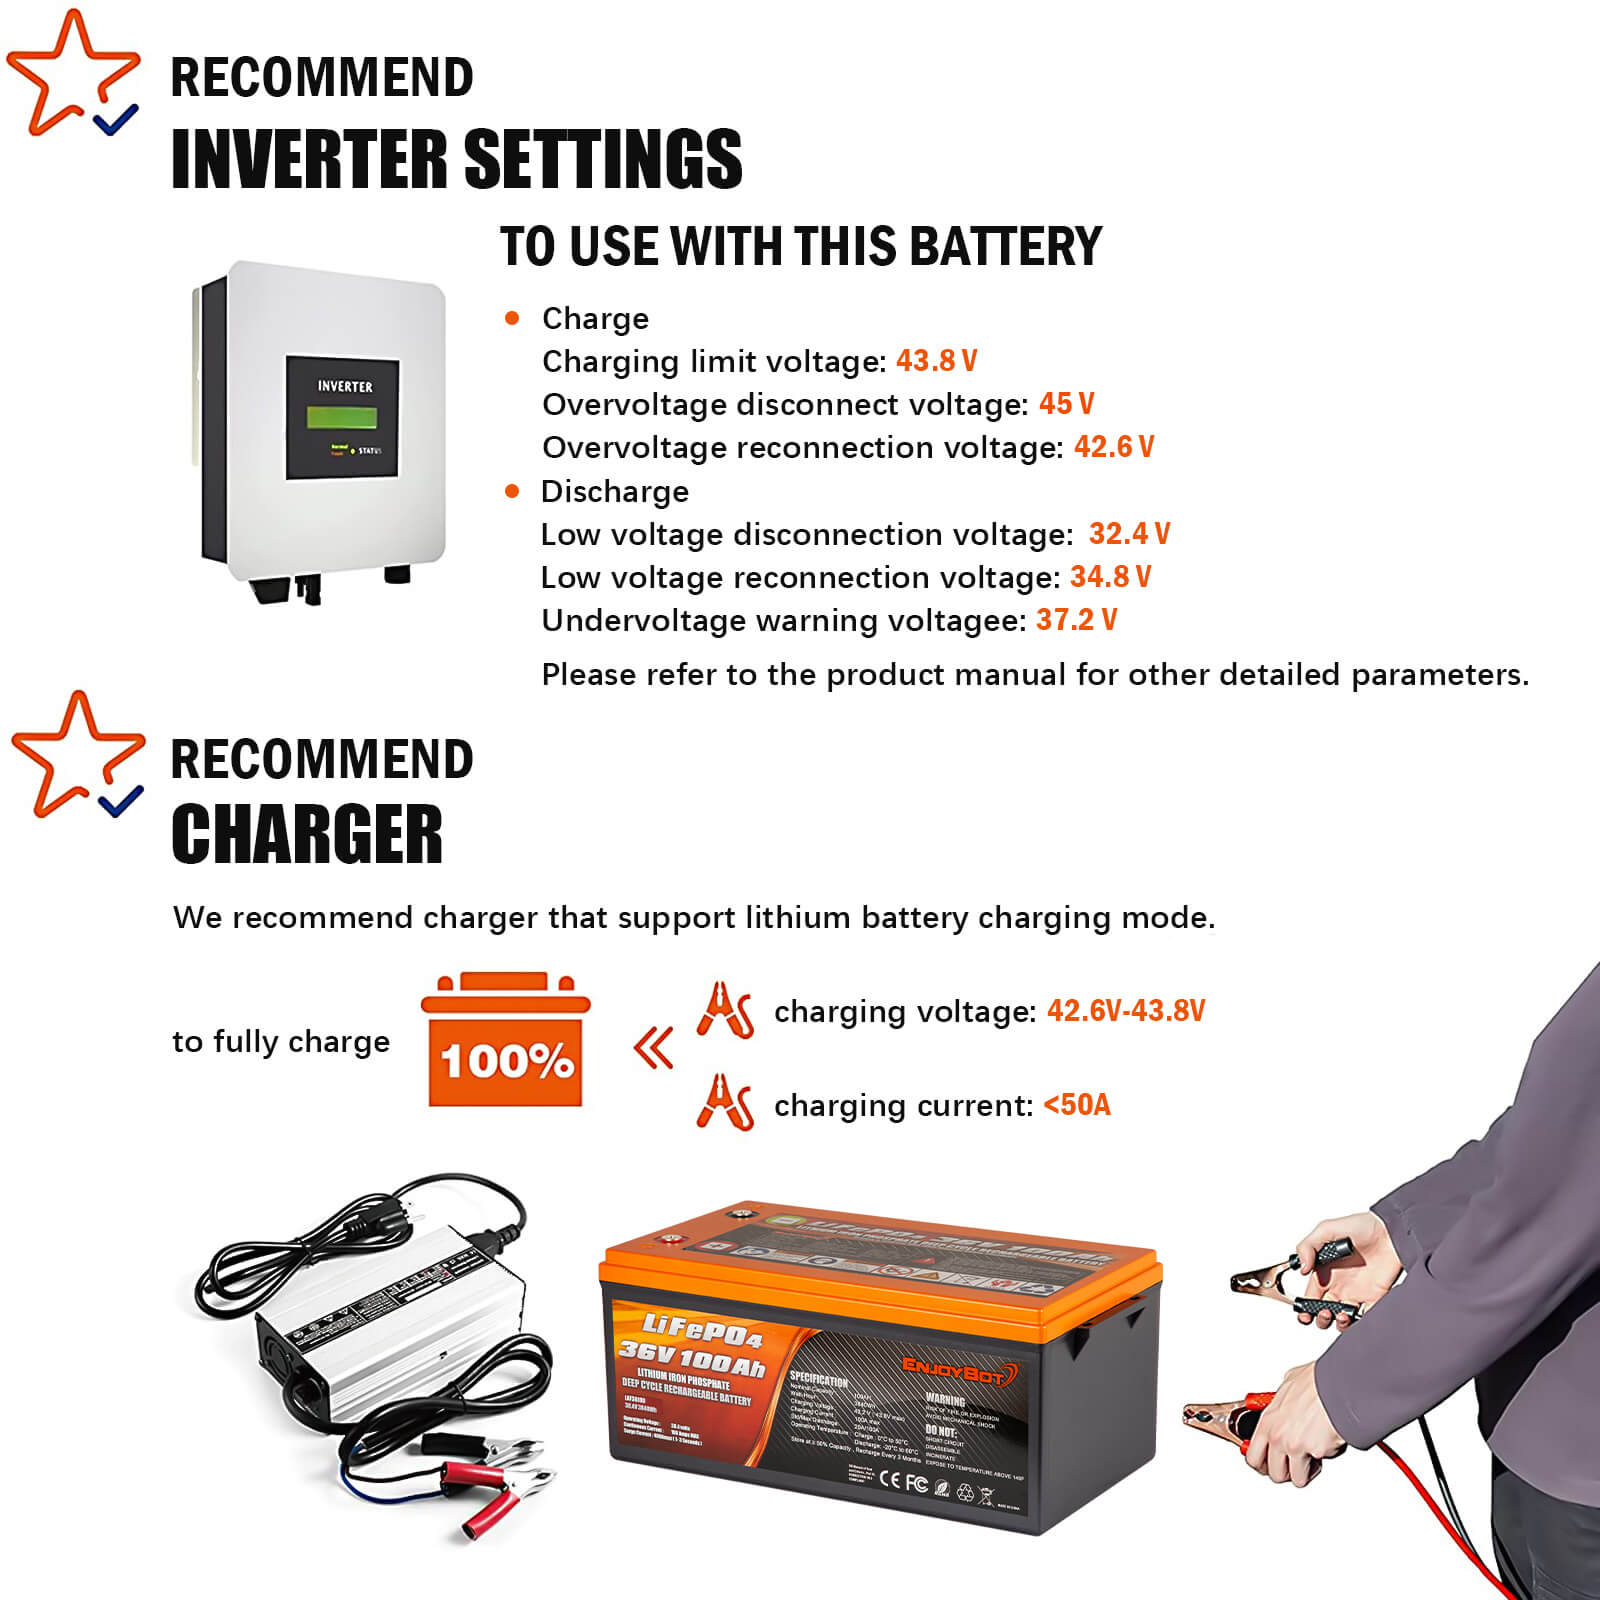 ENJOYBOT Bluetooth 36V 100AH 3840Wh Smart Lithium Battery + Dedicated 20A battery charger